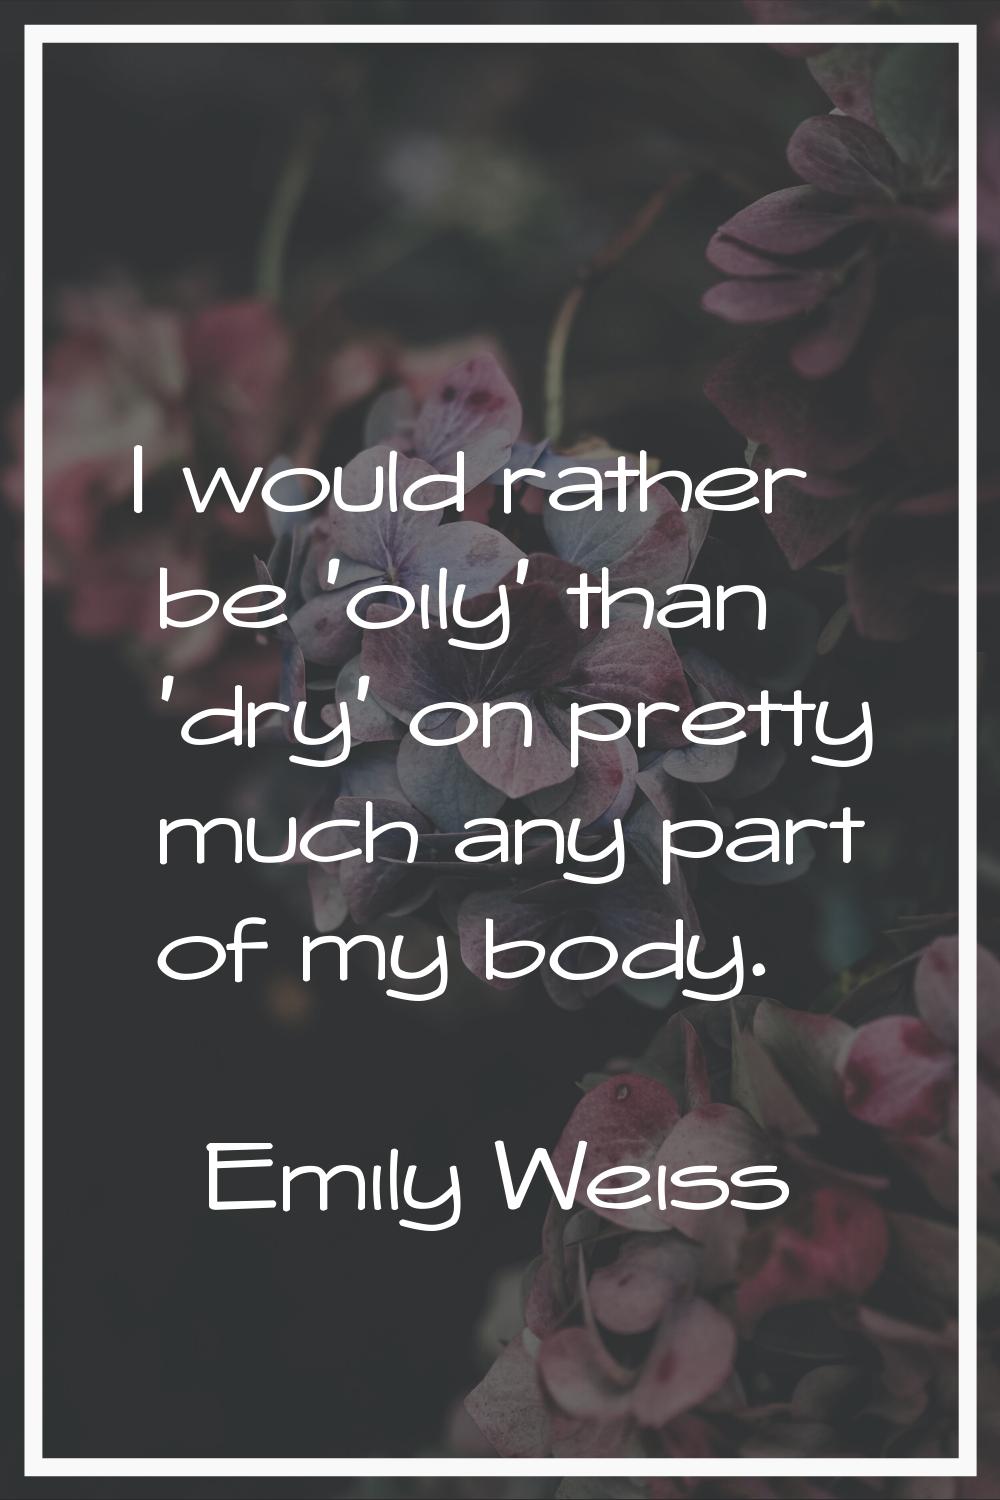 I would rather be 'oily' than 'dry' on pretty much any part of my body.